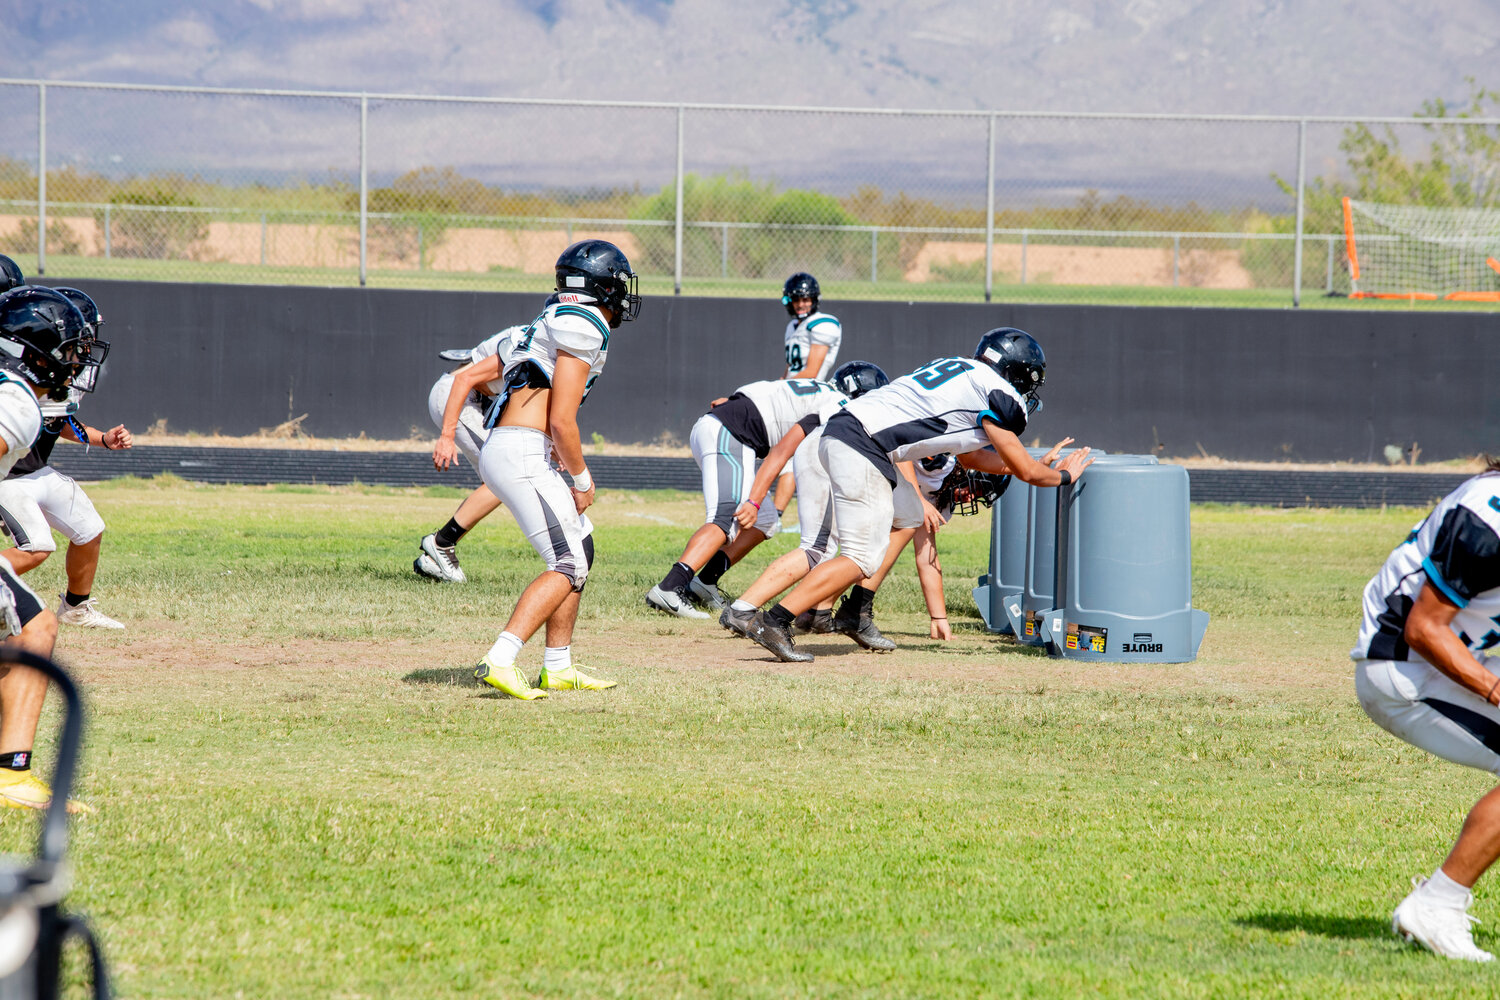 Organ Mountain High School practiced Monday, Aug. 14, under the shadows of the Organ Mountains. The Knights’ new coach, Kenny Sanchez came in from Las Vegas, Nevada, where he coached Bishop Gorman High School for 11 years, including 2016, when he was named National Coach of the Year by MaxPreps. The Knights were 3-7 last season.